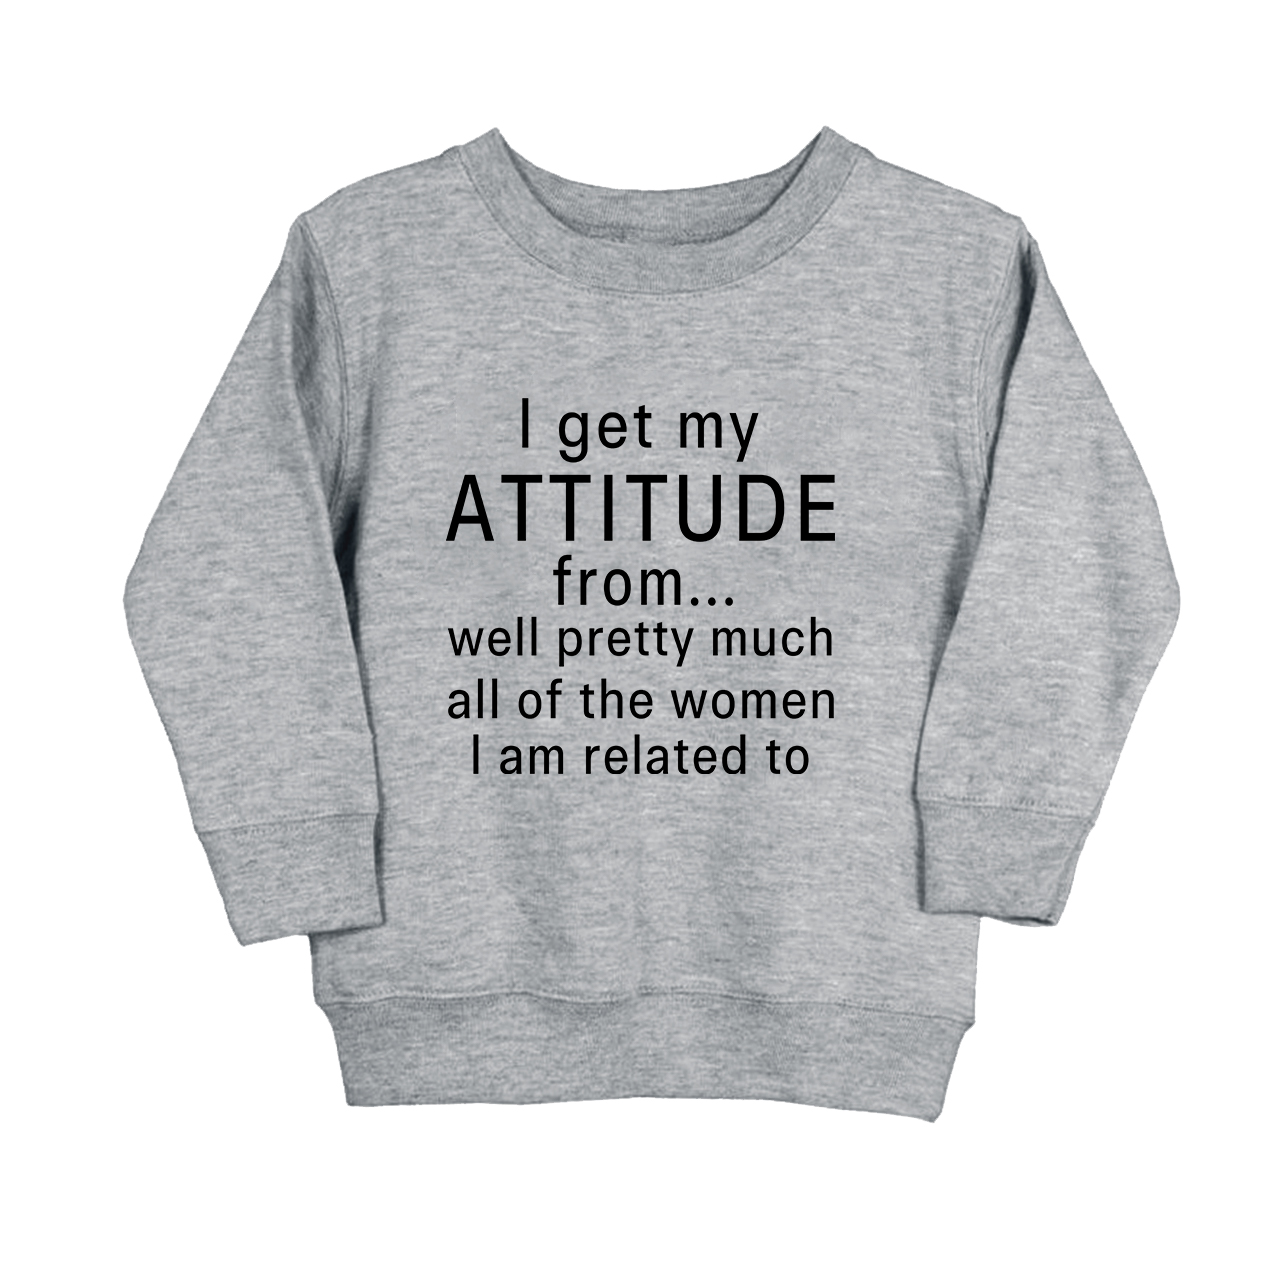 I Get My Attitude From Pretty Much All Of The Women I’m Related To Kids Sweatshirt